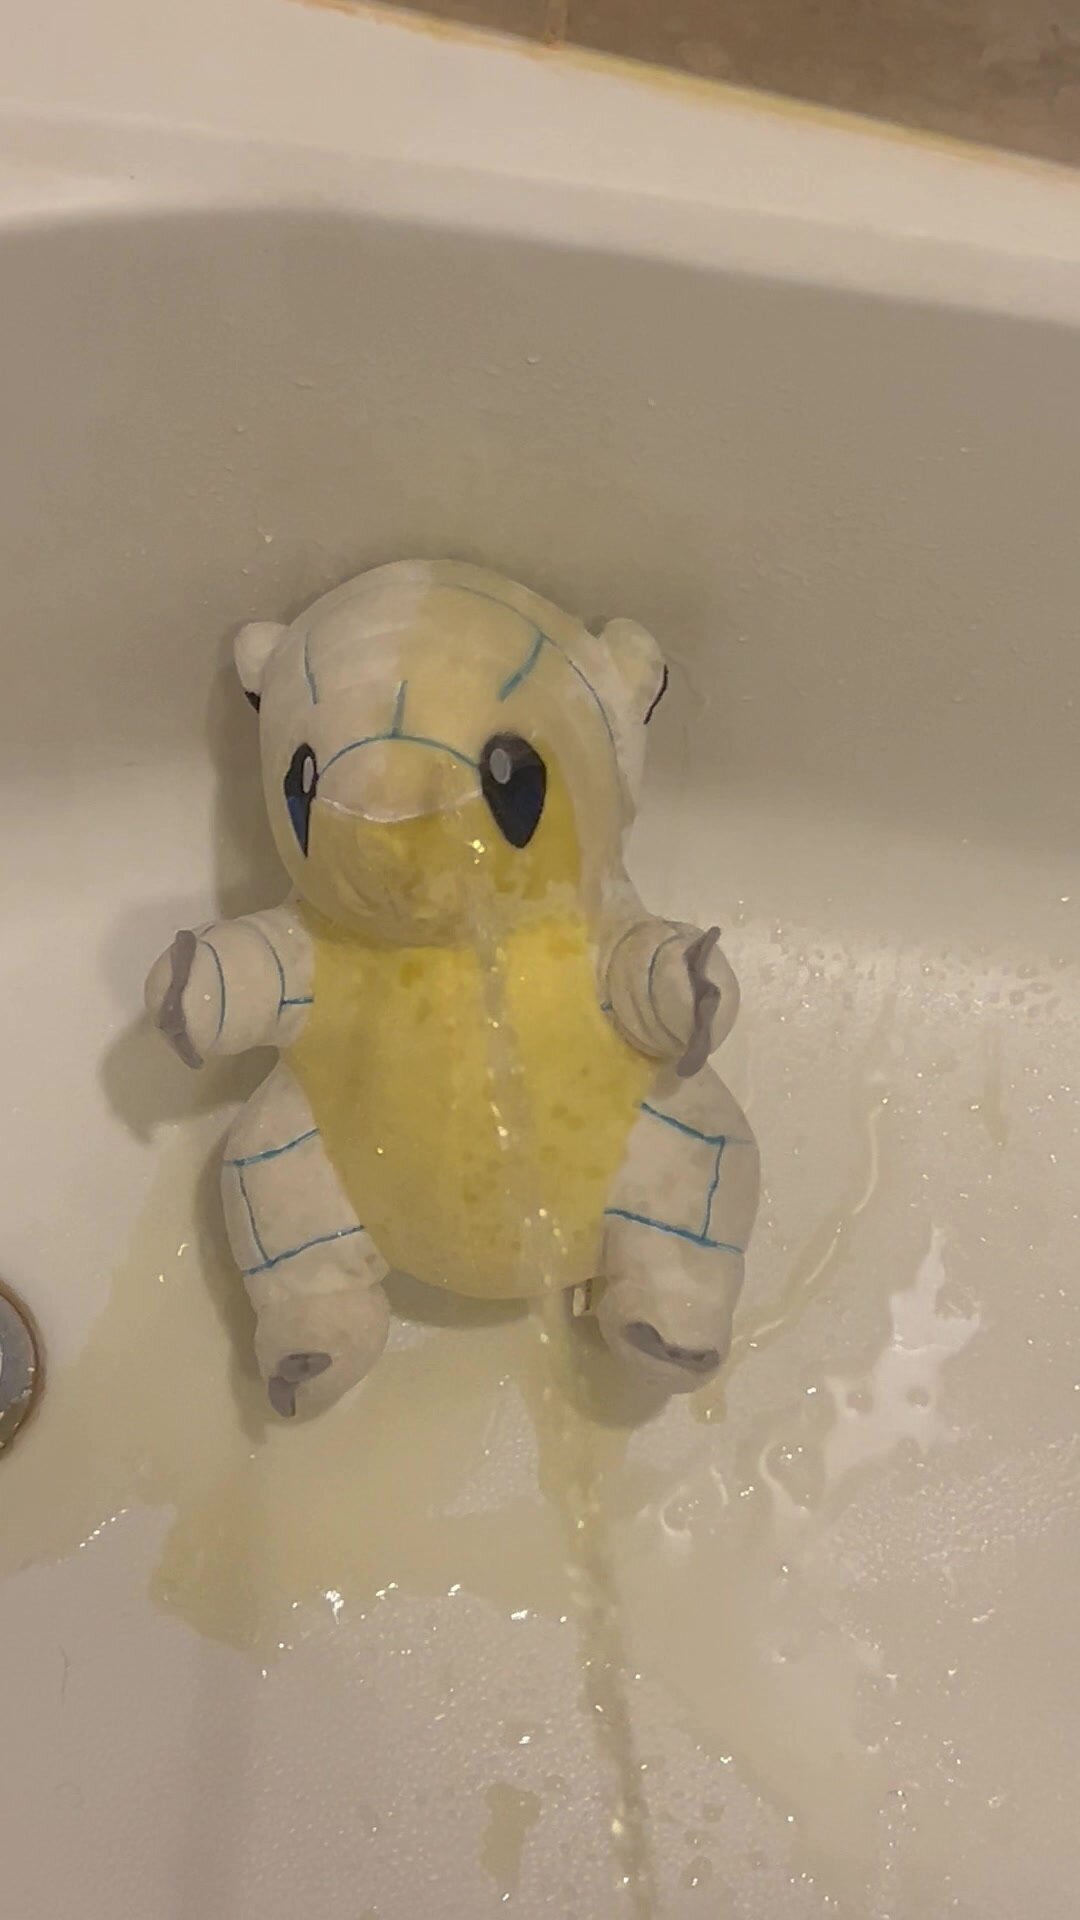 Another Random Pokemon Gets Showered In Piss